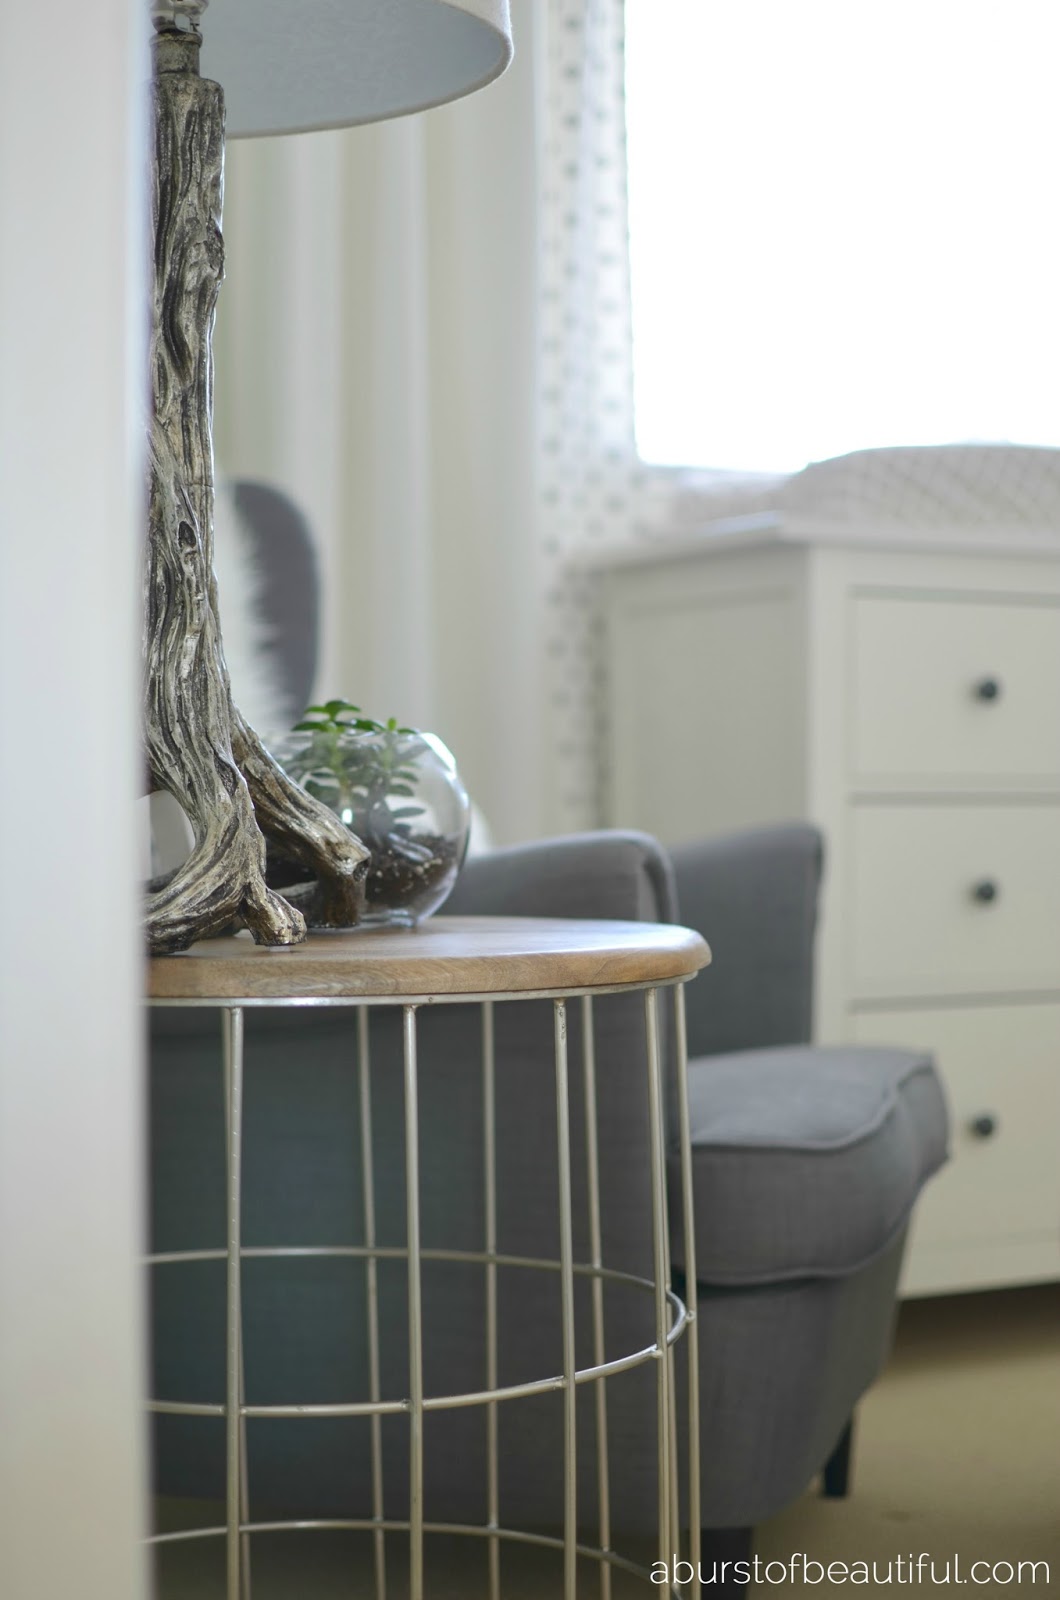 A soft and soothing gender neutral nursery | A Burst of Beautiful